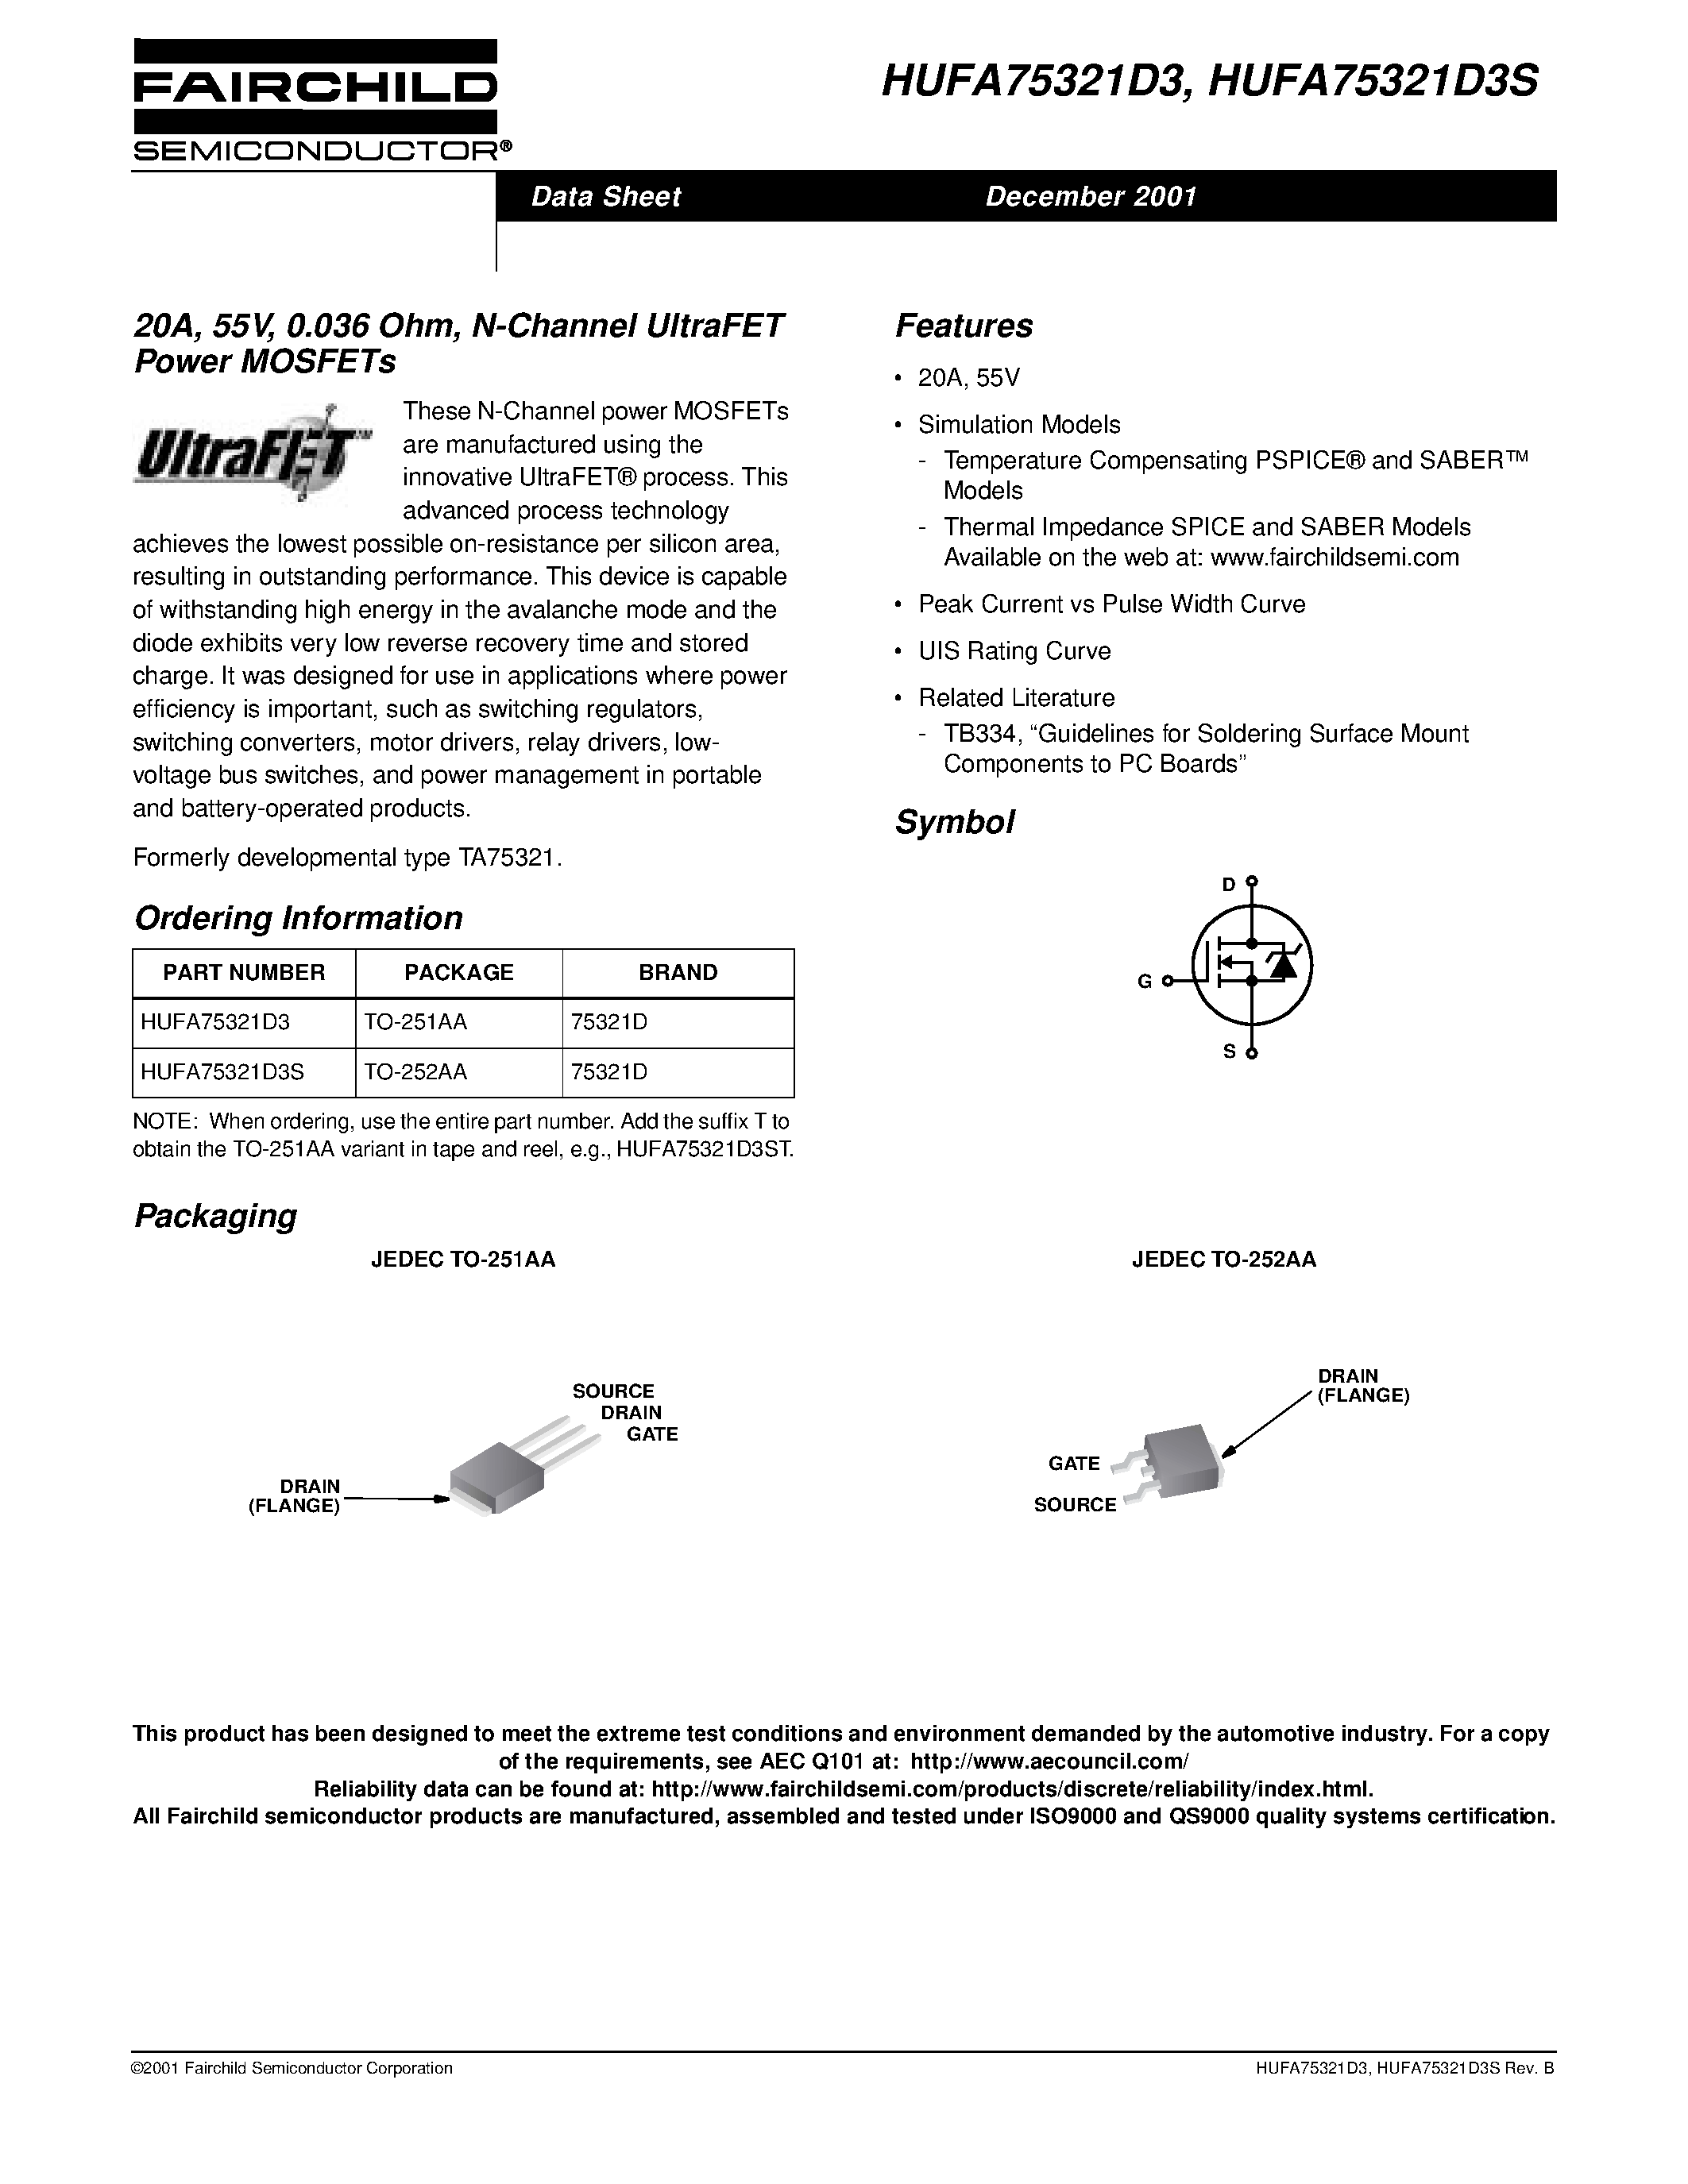 Datasheet HUFA75321D3S - 20A/ 55V/ 0.036 Ohm/ N-Channel UltraFET Power MOSFETs page 1